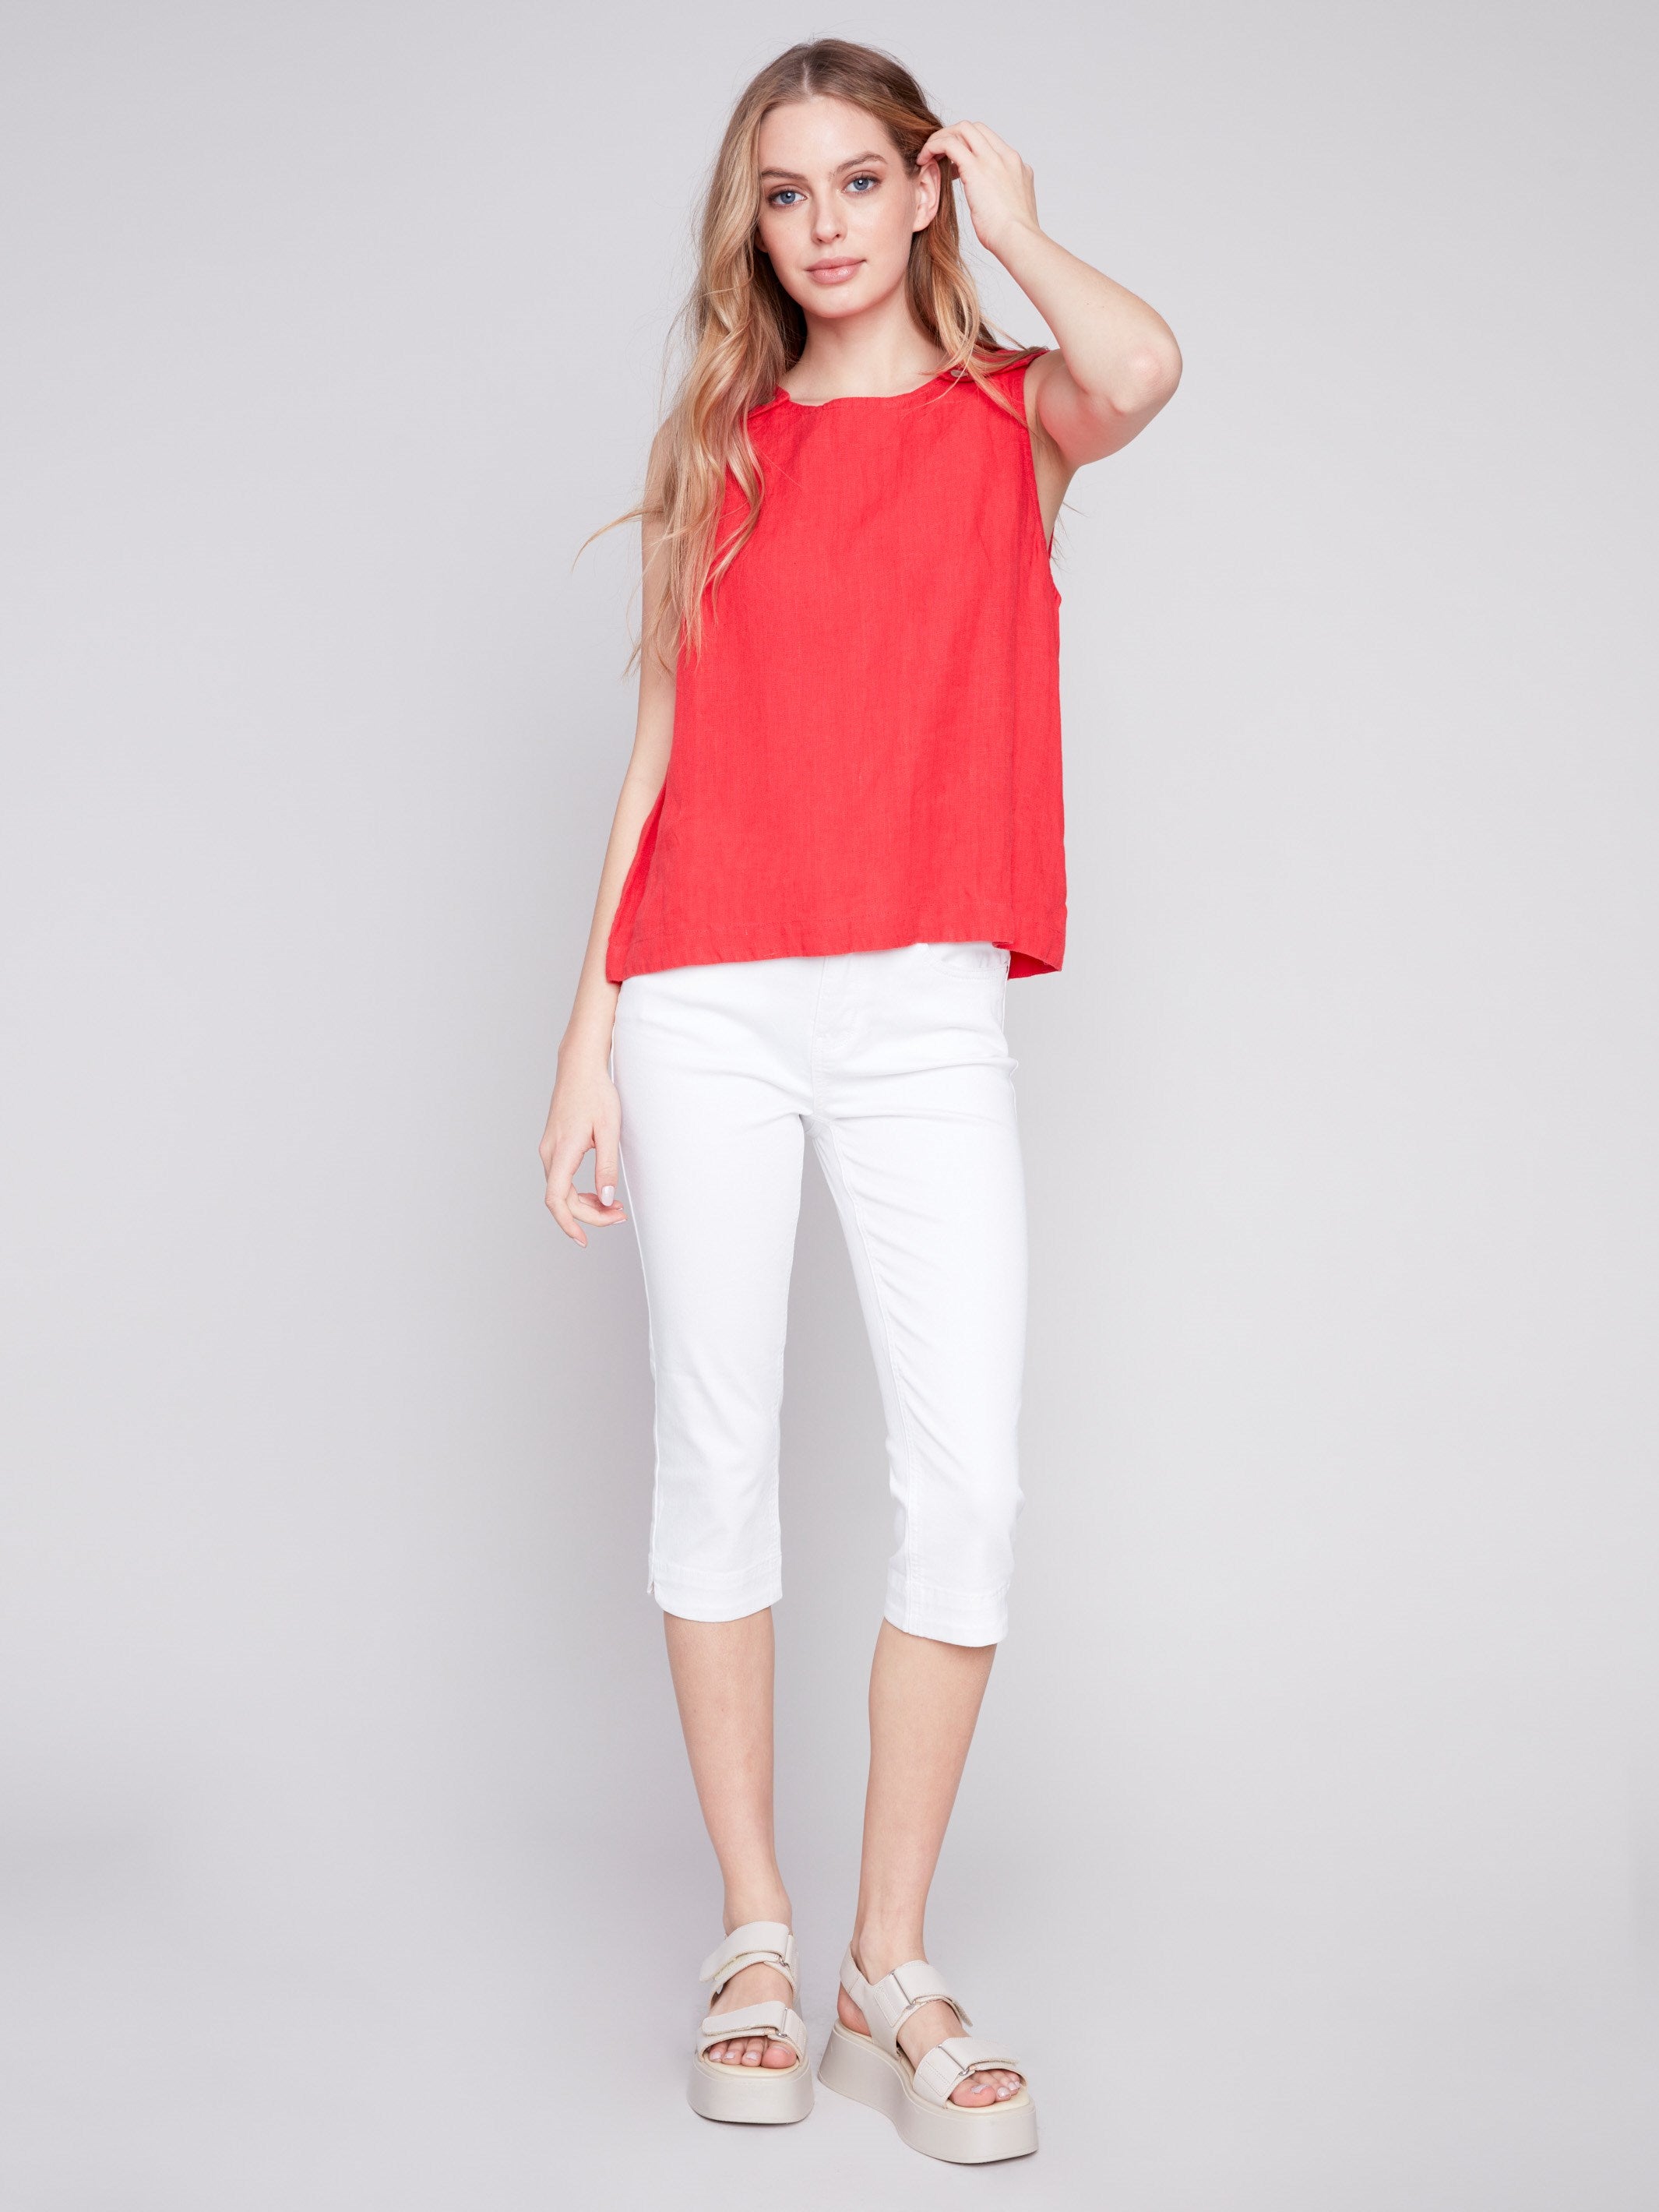 Sleeveless Linen Top with Button Detail - Cherry - Charlie B Collection Canada - Image 3